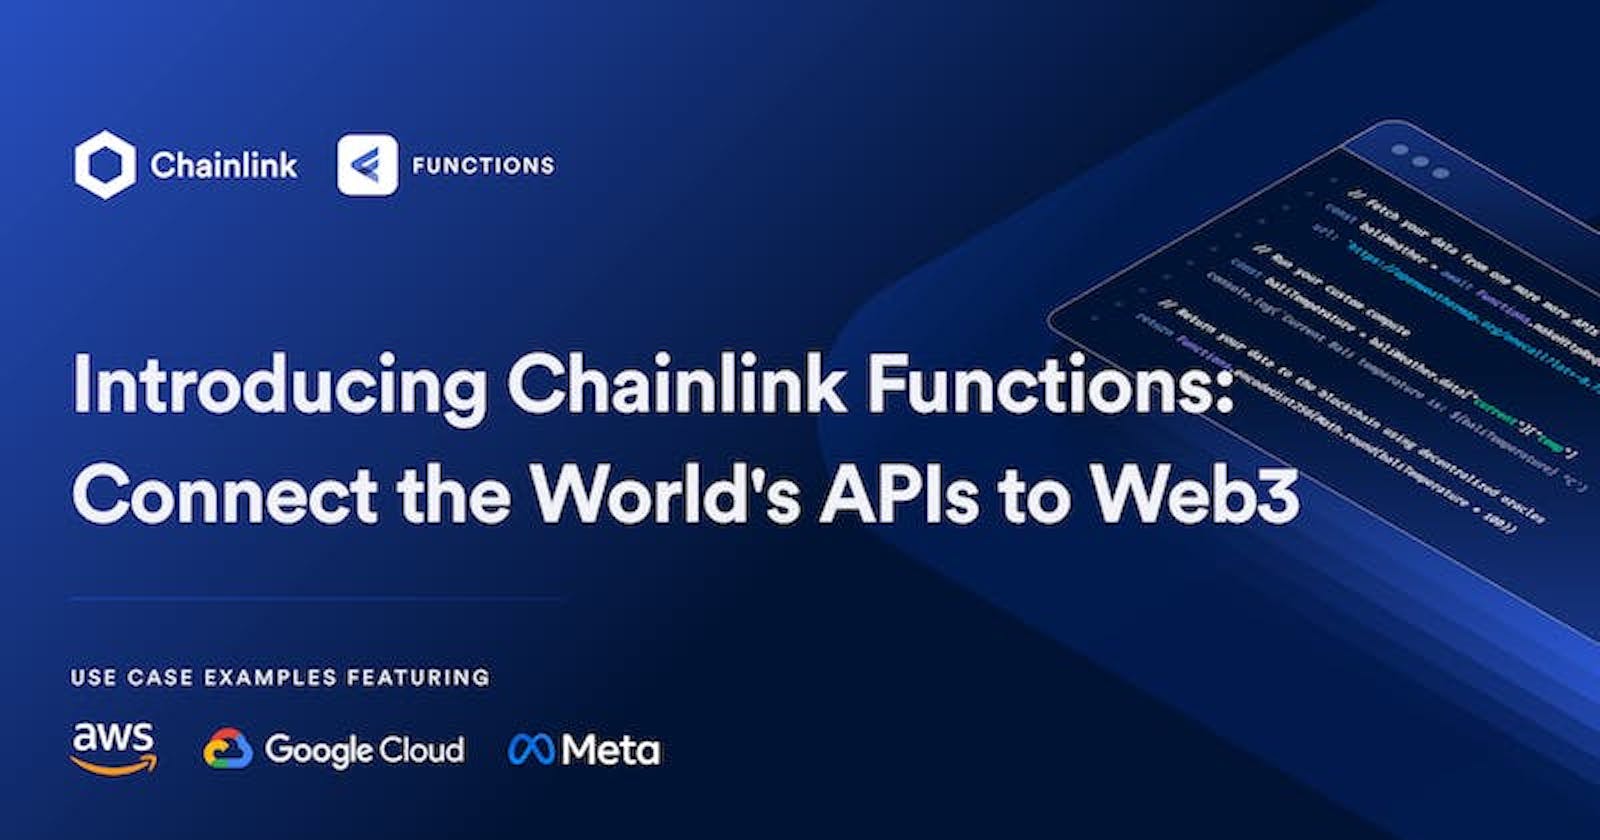 Chainlink Functions